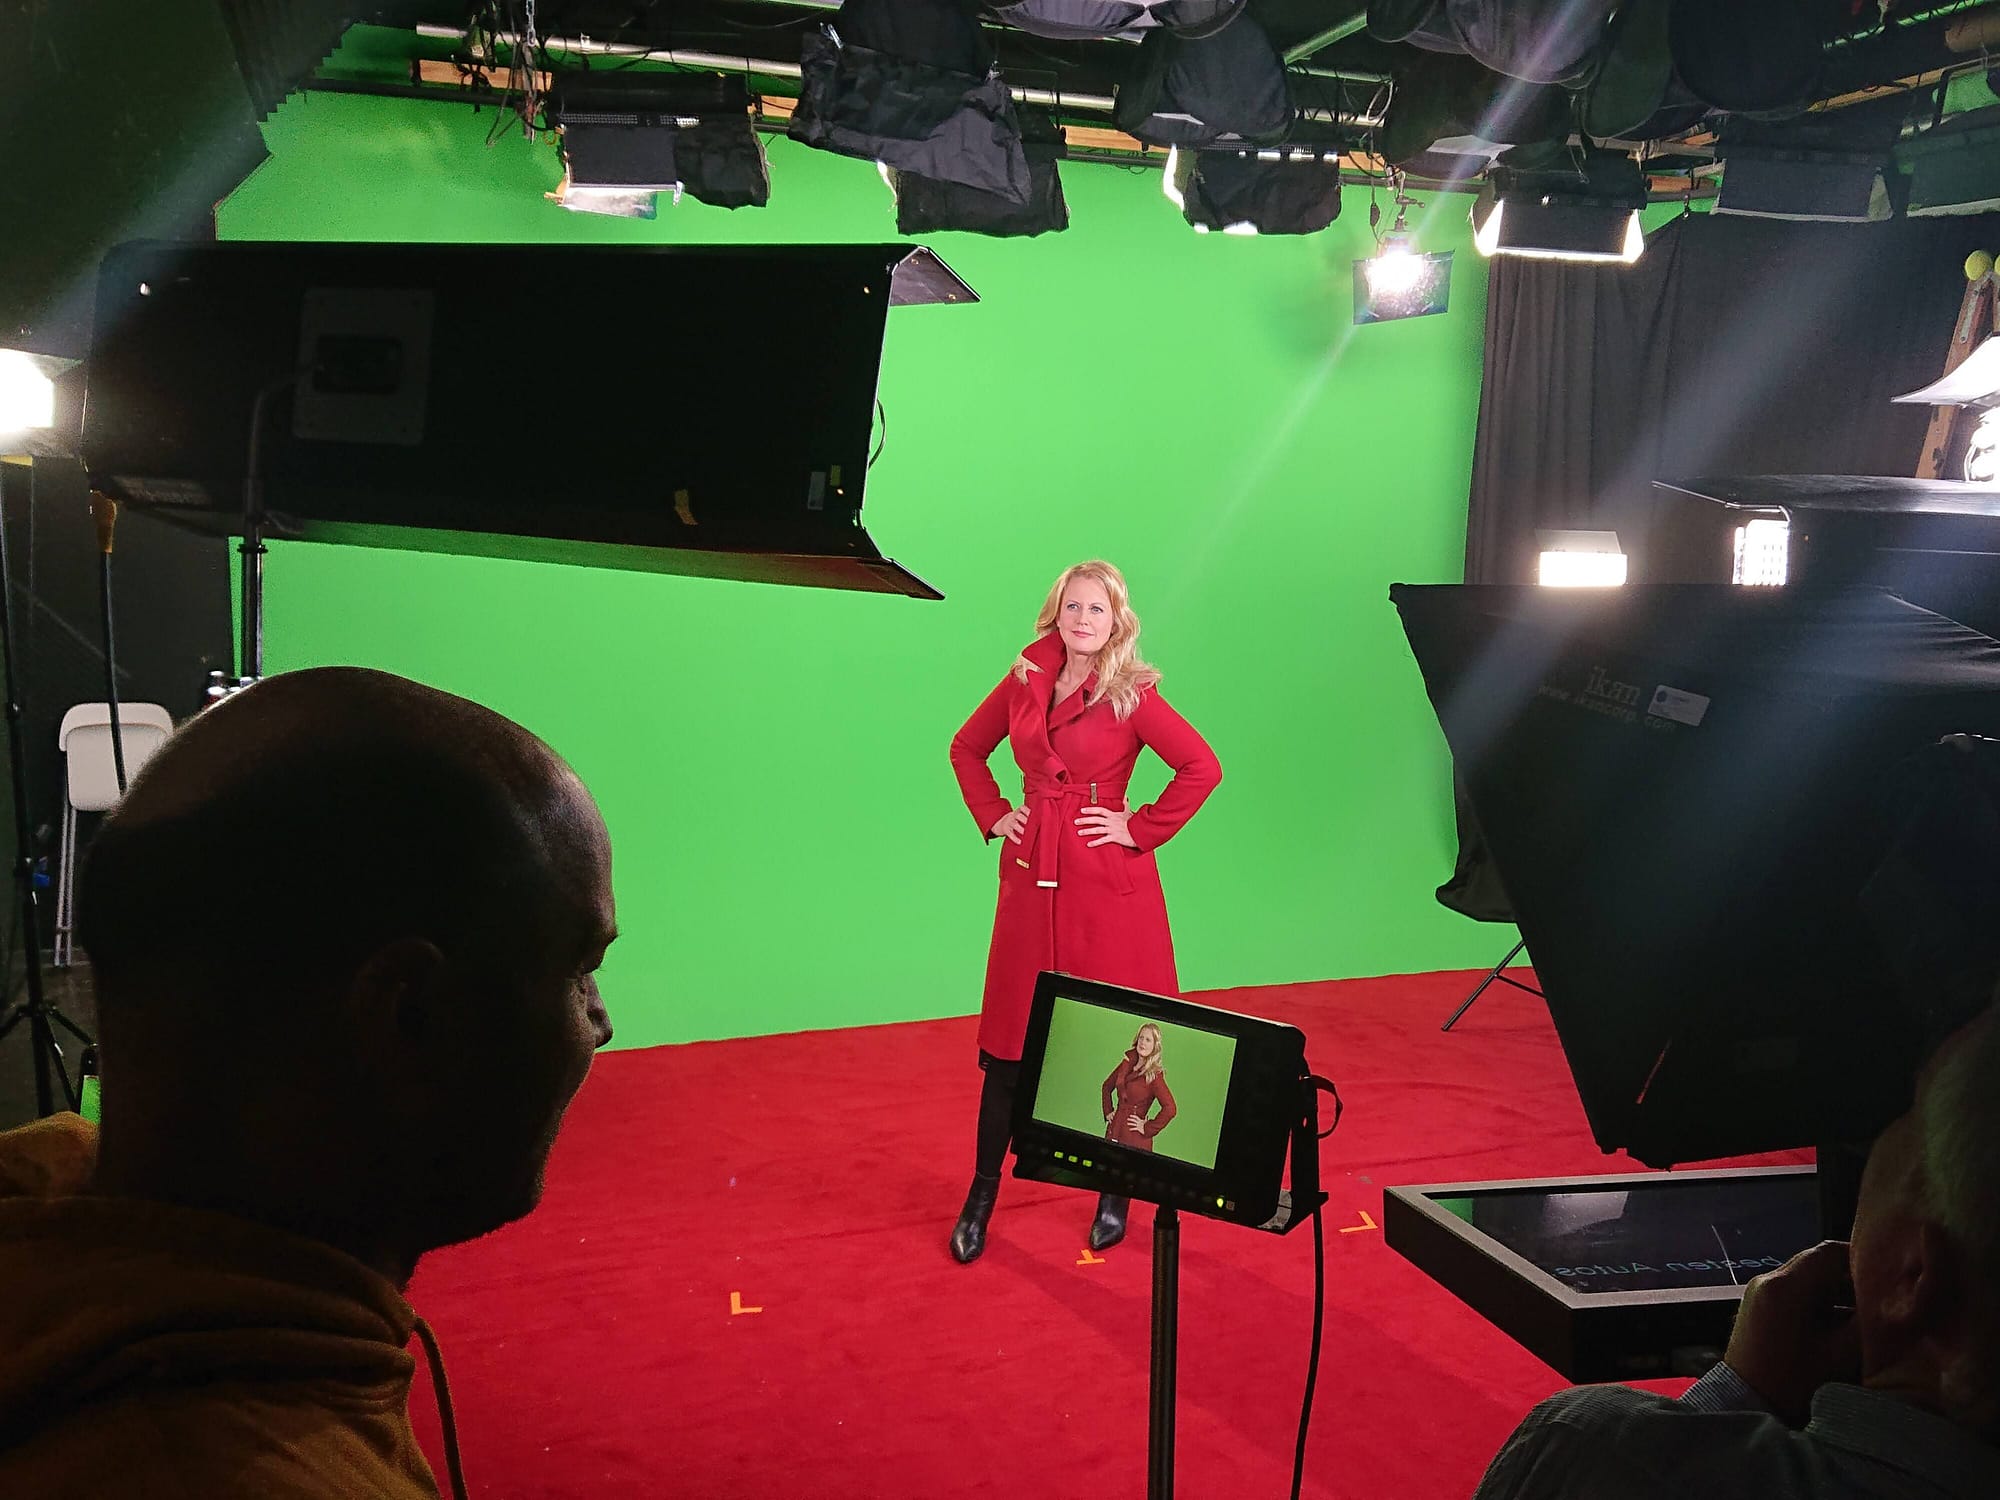 Star posing in front of a greenscreen while being recorded